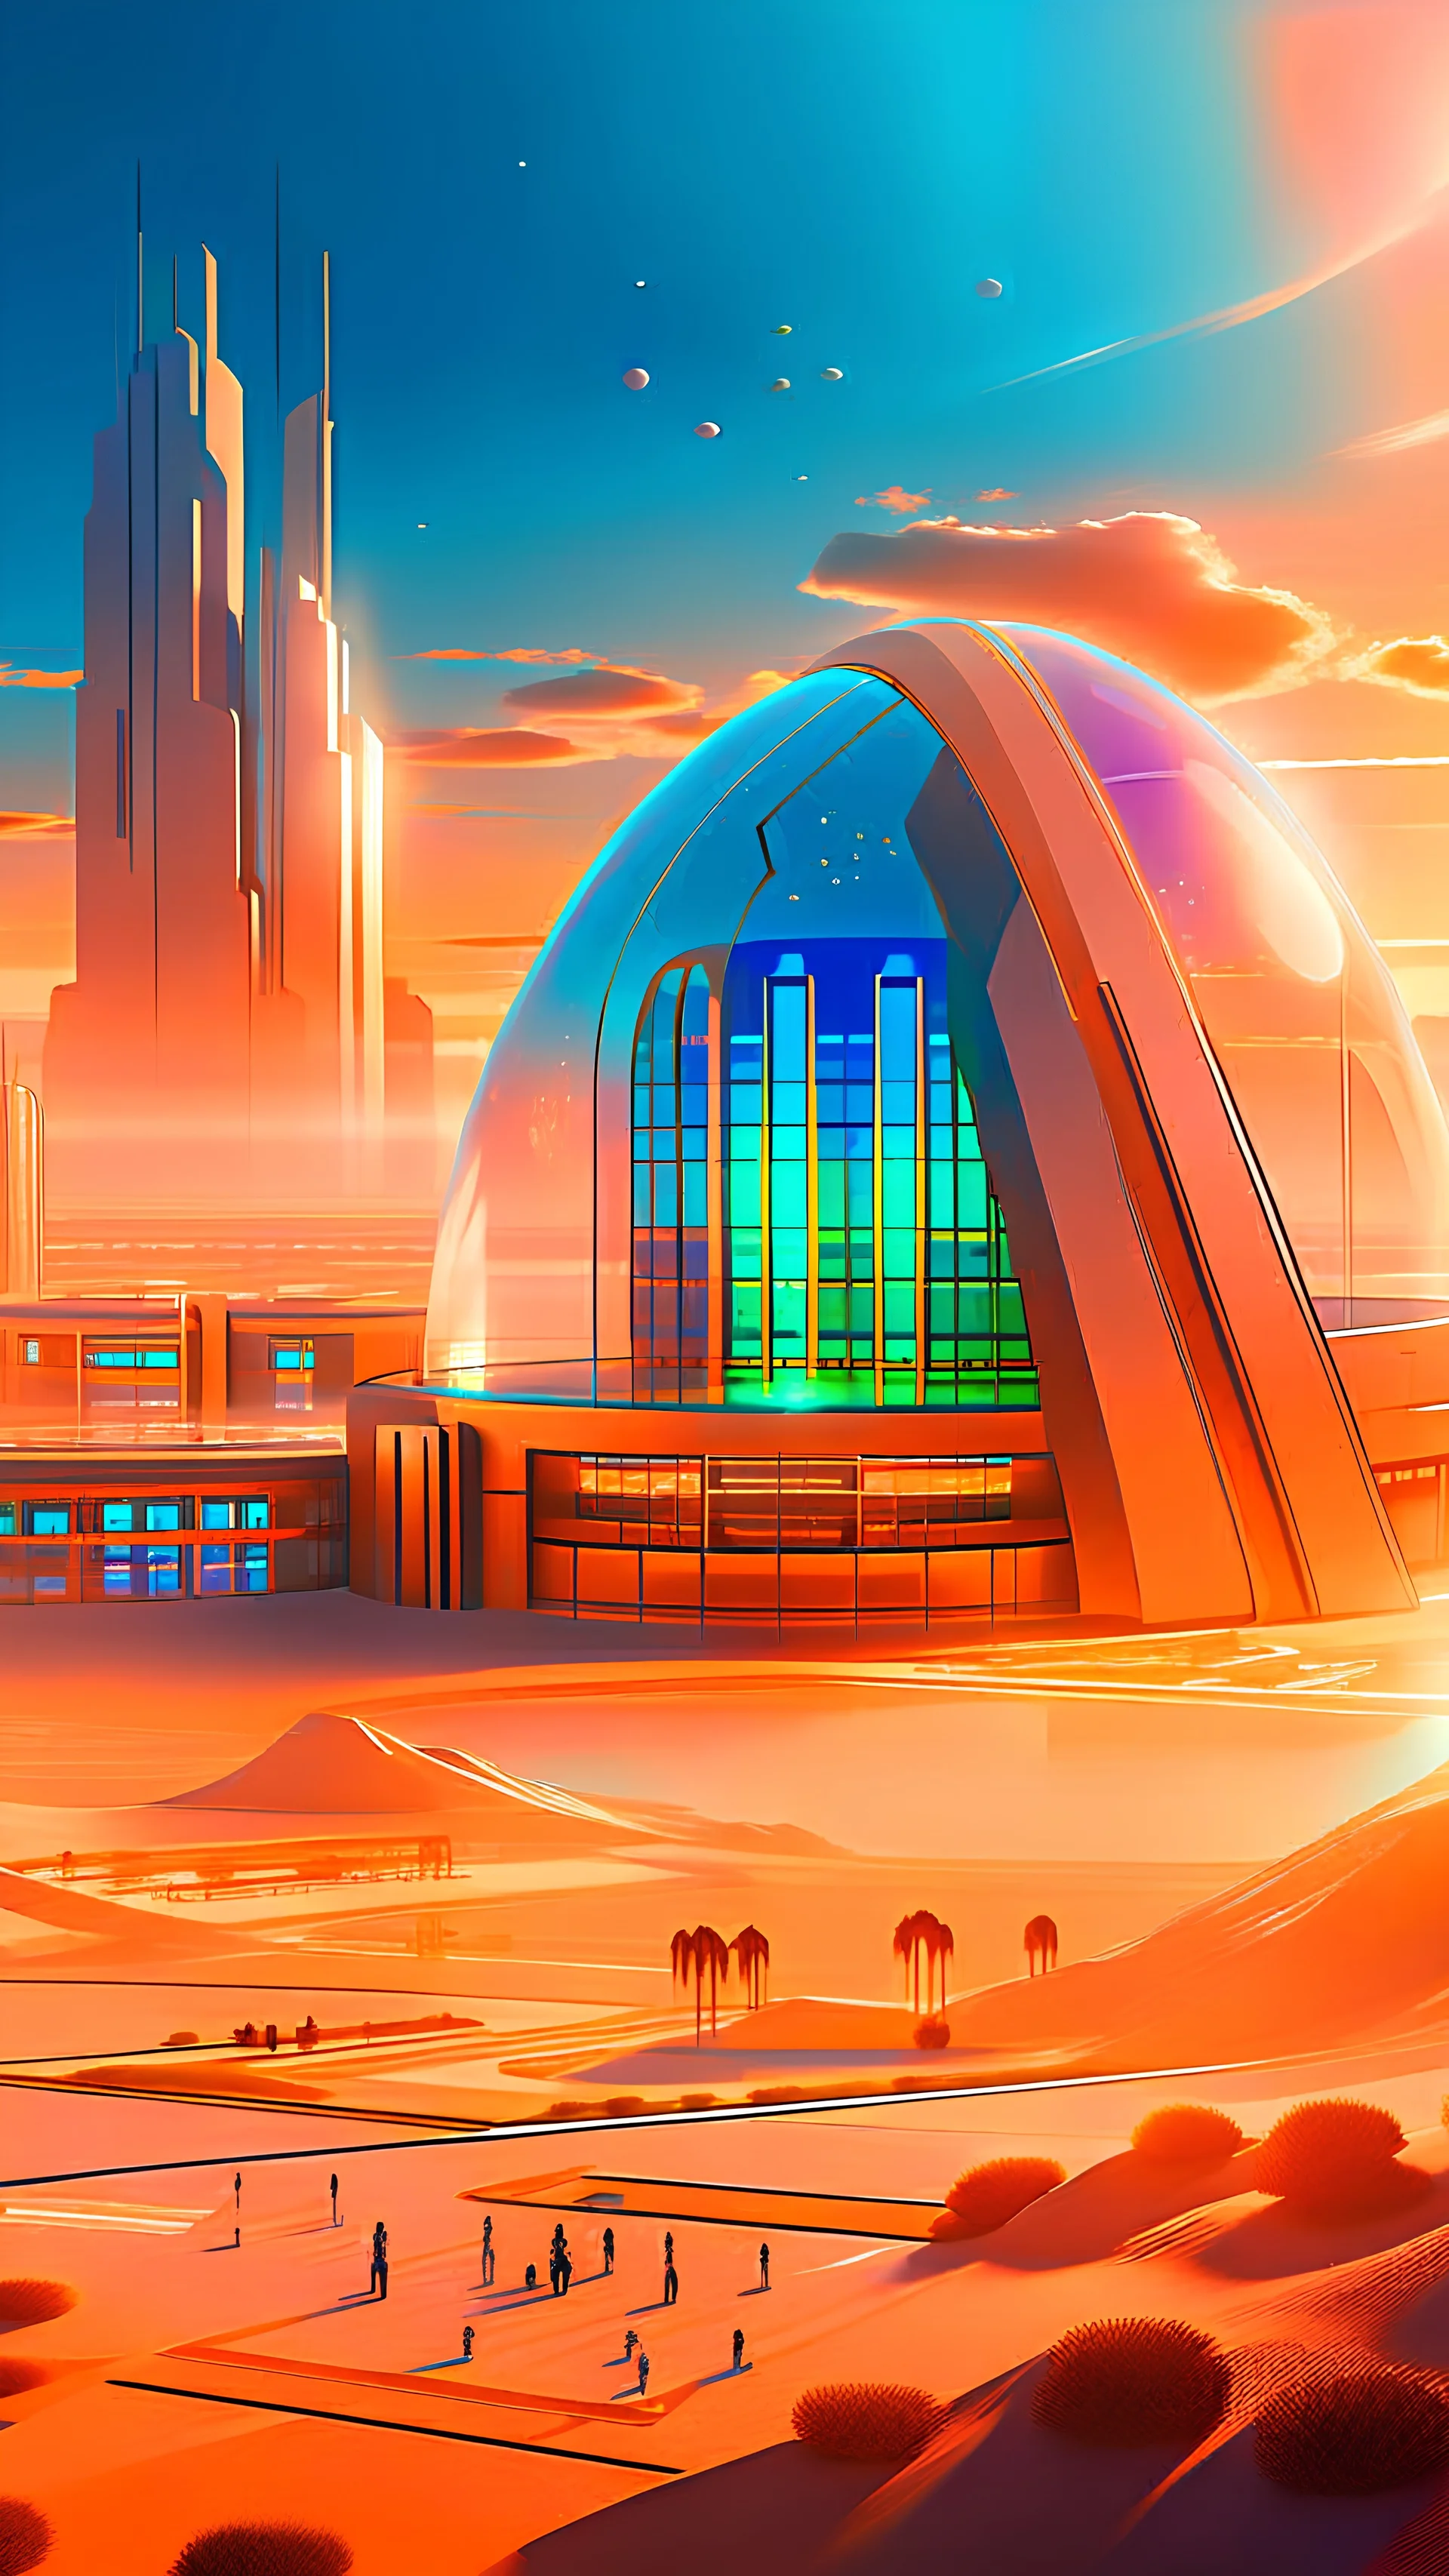 A dune landscape with a massive futuristic city covered by a greenhouse like structure in a distance.